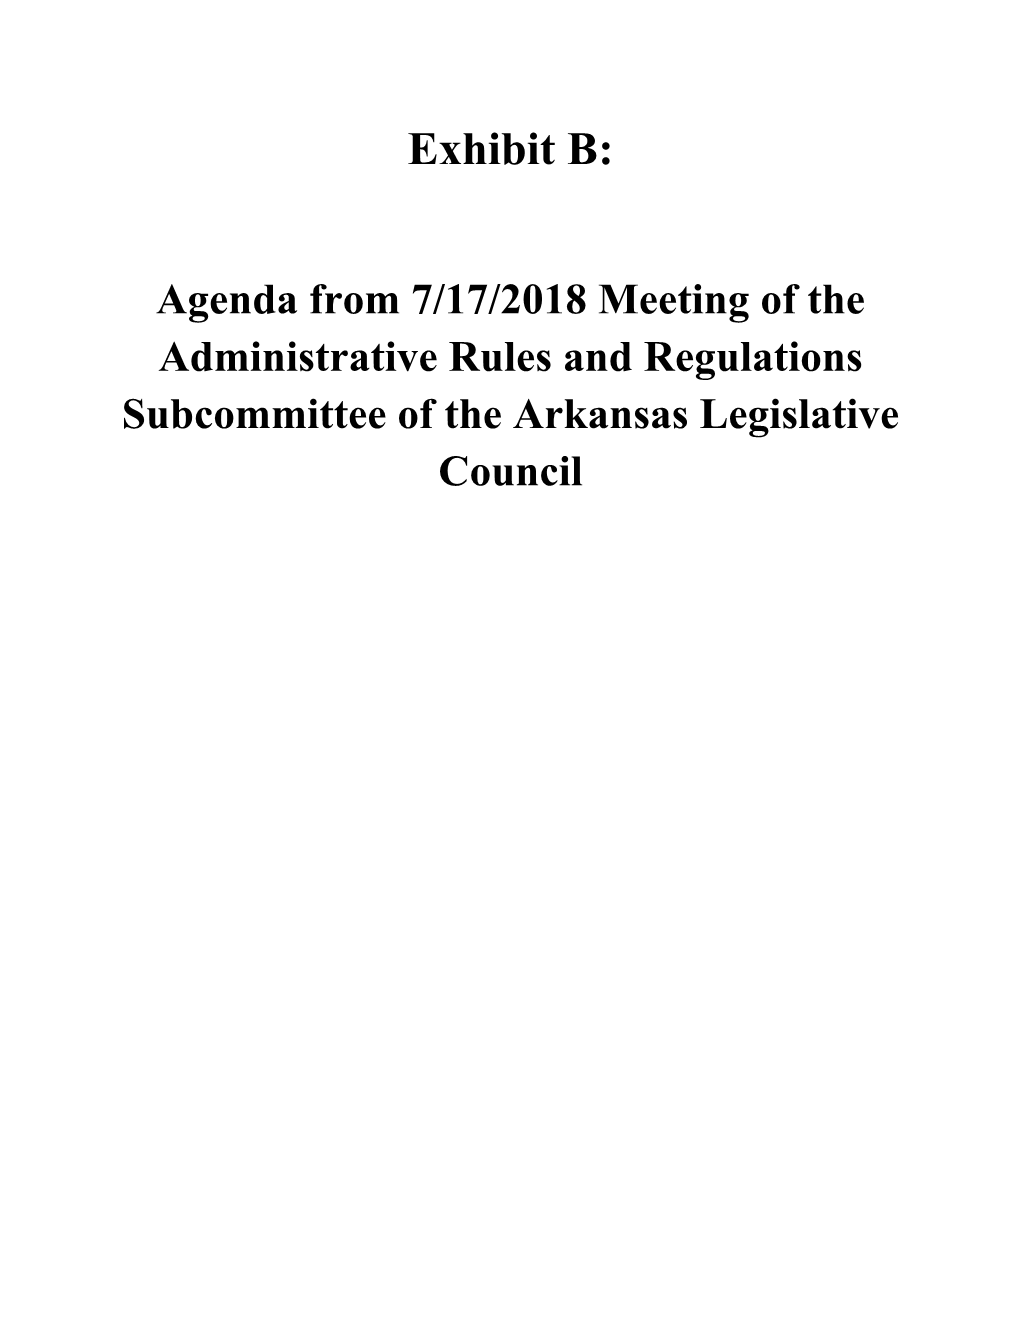 Agenda from 7/17/2018 Meeting of the Administrative Rules and Regulations Subcommittee of the Arkansas Legislative Council